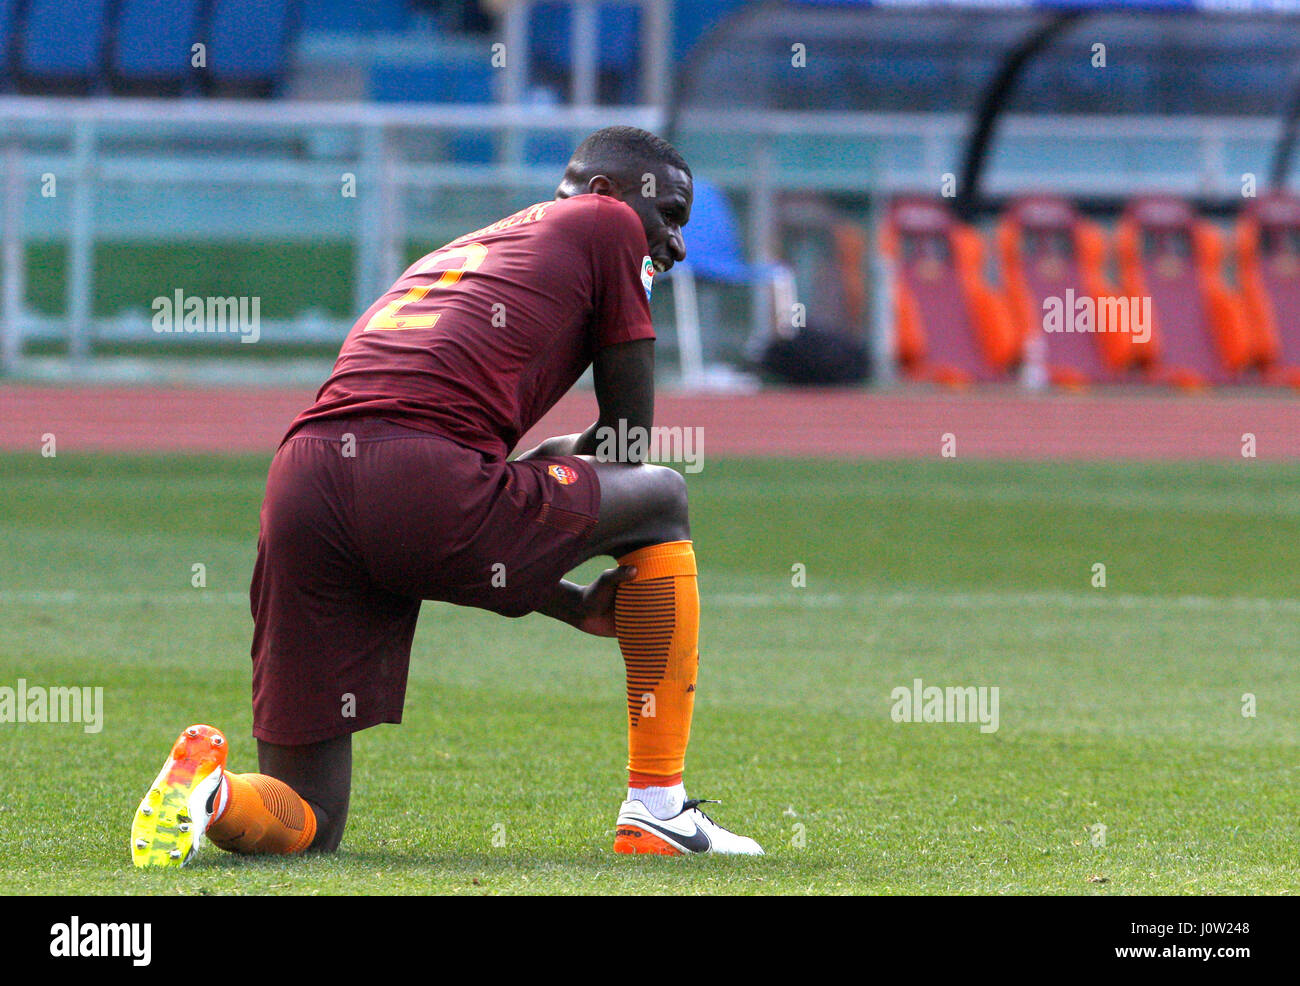 Rome, Italy. 15th Apr, 2017. RomaÕs Antonio Ruediger reacts at the end of the Serie A soccer match between Roma and Atalanta at the Olympic stadium. The game ended 1-1. Credit: Riccardo De Luca/Pacific Press/Alamy Live News Stock Photo